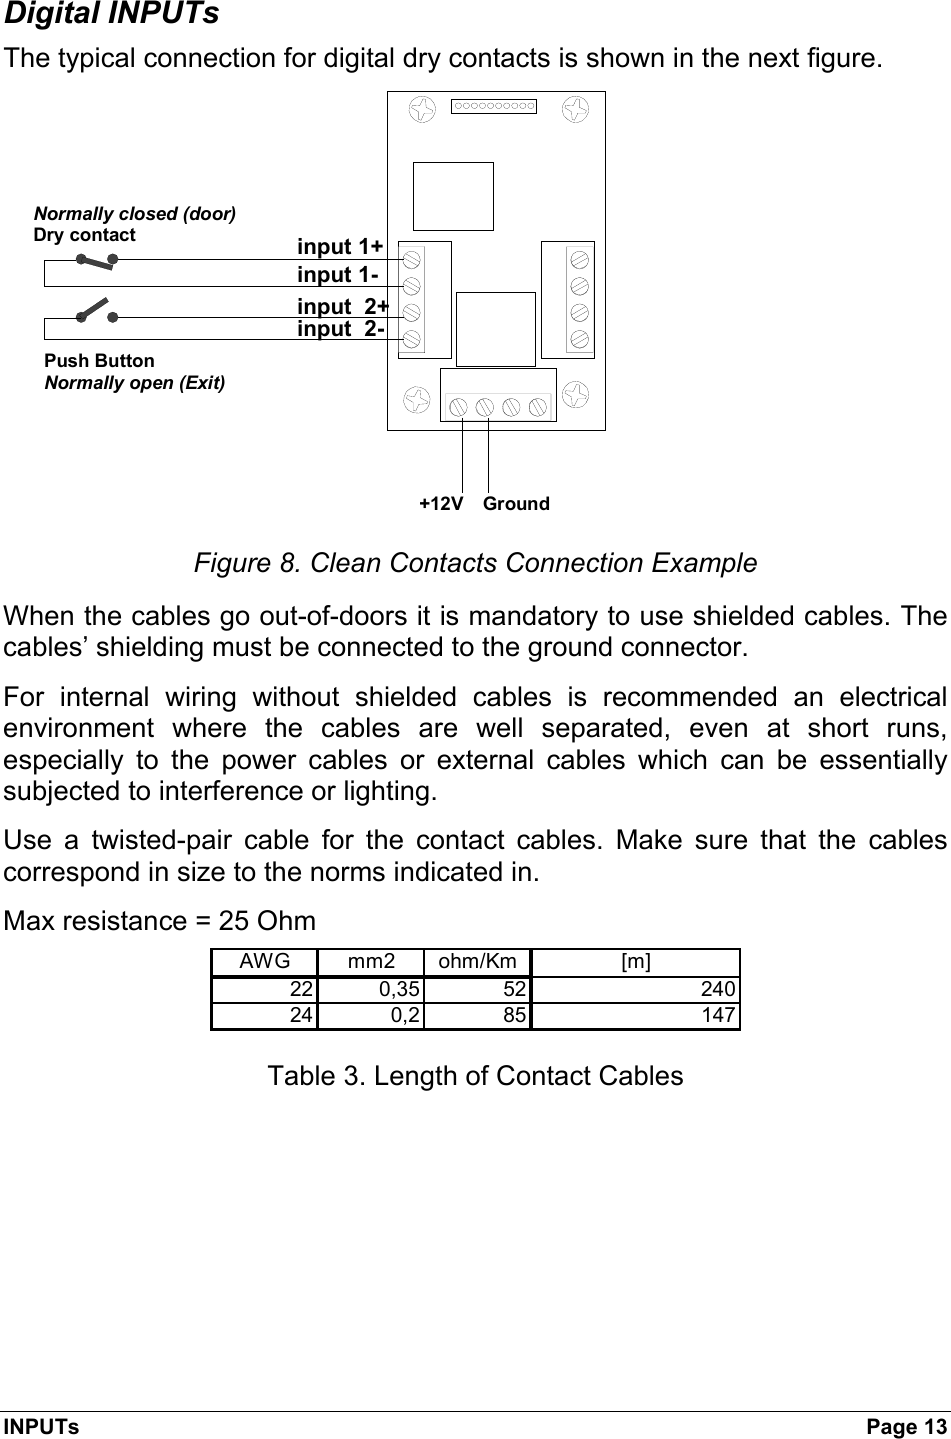 INPUTs  Page 13 Digital INPUTs The typical connection for digital dry contacts is shown in the next figure. input 1+input 1-input  2+input  2-Normally closed (door)Push Button+12V GroundDry contactNormally open (Exit)Figure 8. Clean Contacts Connection Example When the cables go out-of-doors it is mandatory to use shielded cables. The cables’ shielding must be connected to the ground connector. For internal wiring without shielded cables is recommended an electrical environment where the cables are well separated, even at short runs, especially to the power cables or external cables which can be essentially subjected to interference or lighting. Use a twisted-pair cable for the contact cables. Make sure that the cables correspond in size to the norms indicated in. Max resistance = 25 Ohm AWG mm2 ohm/Km [m]22 0,35 52 24024 0,2 85 147   Table 3. Length of Contact Cables 